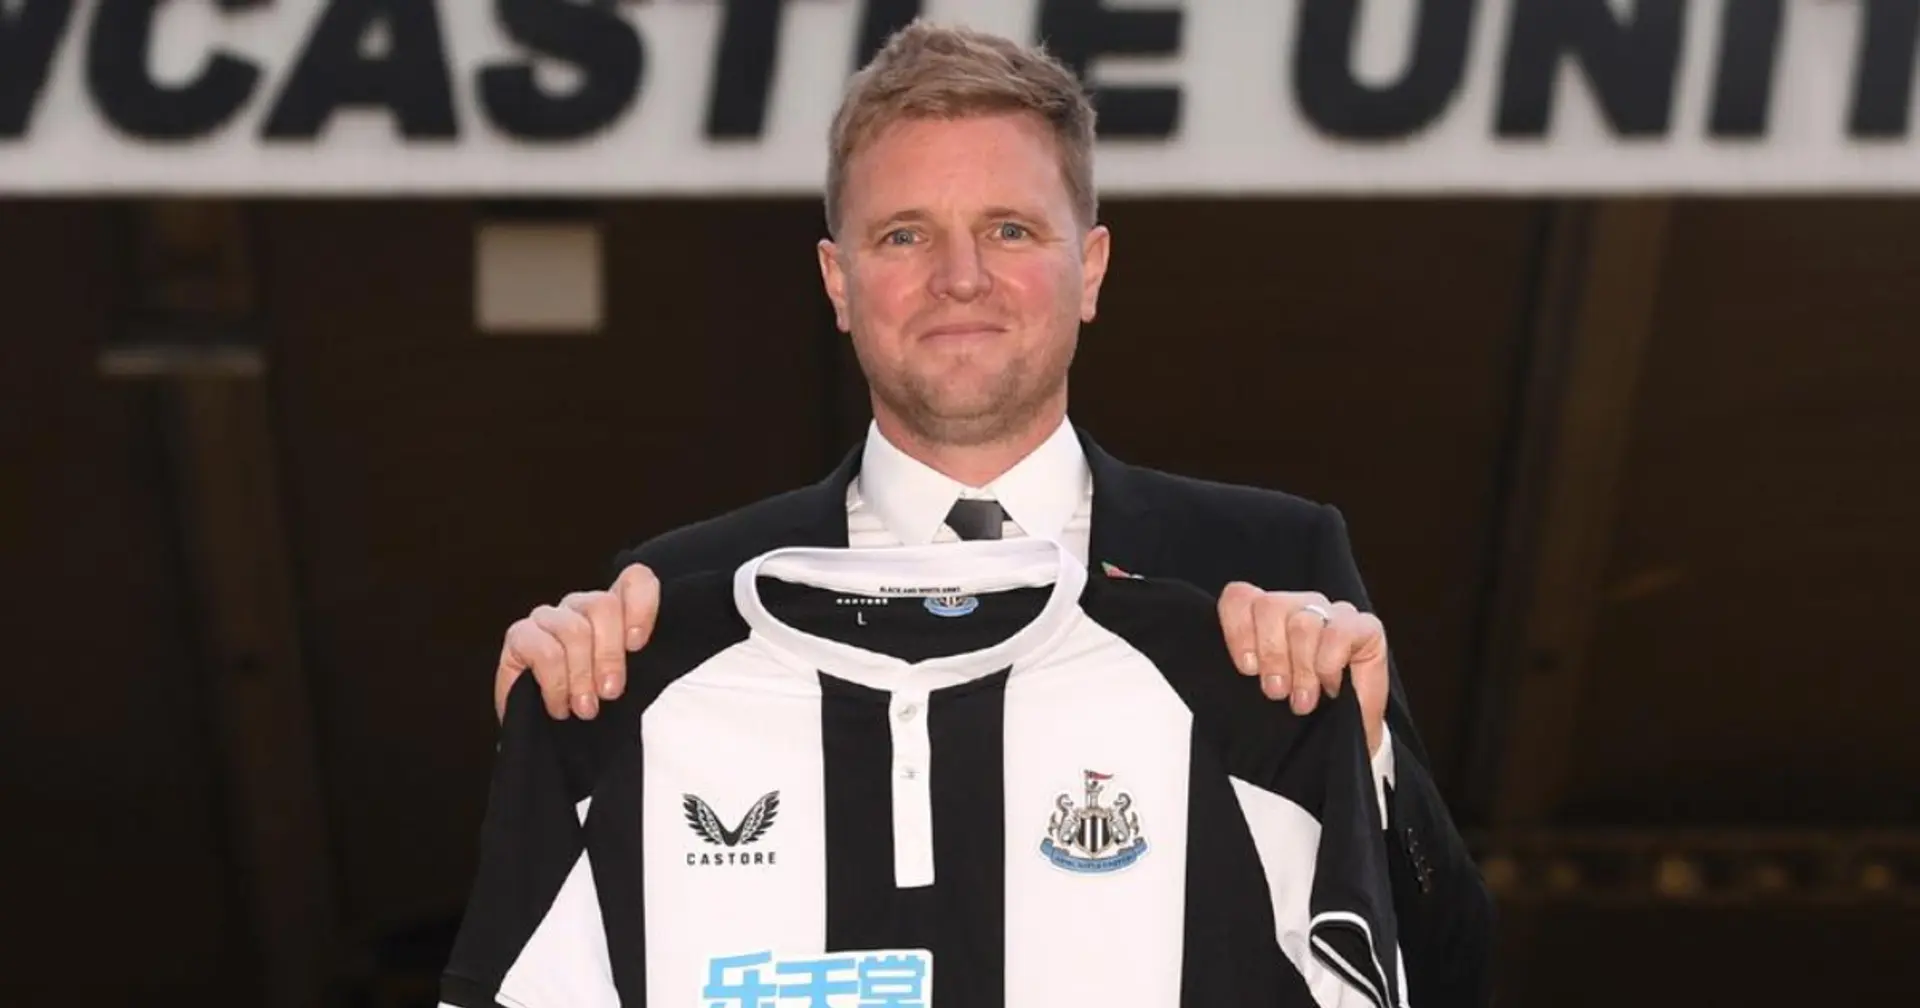 Newcastle ready to offer Eddie Howe new deal after incredible January turnaround